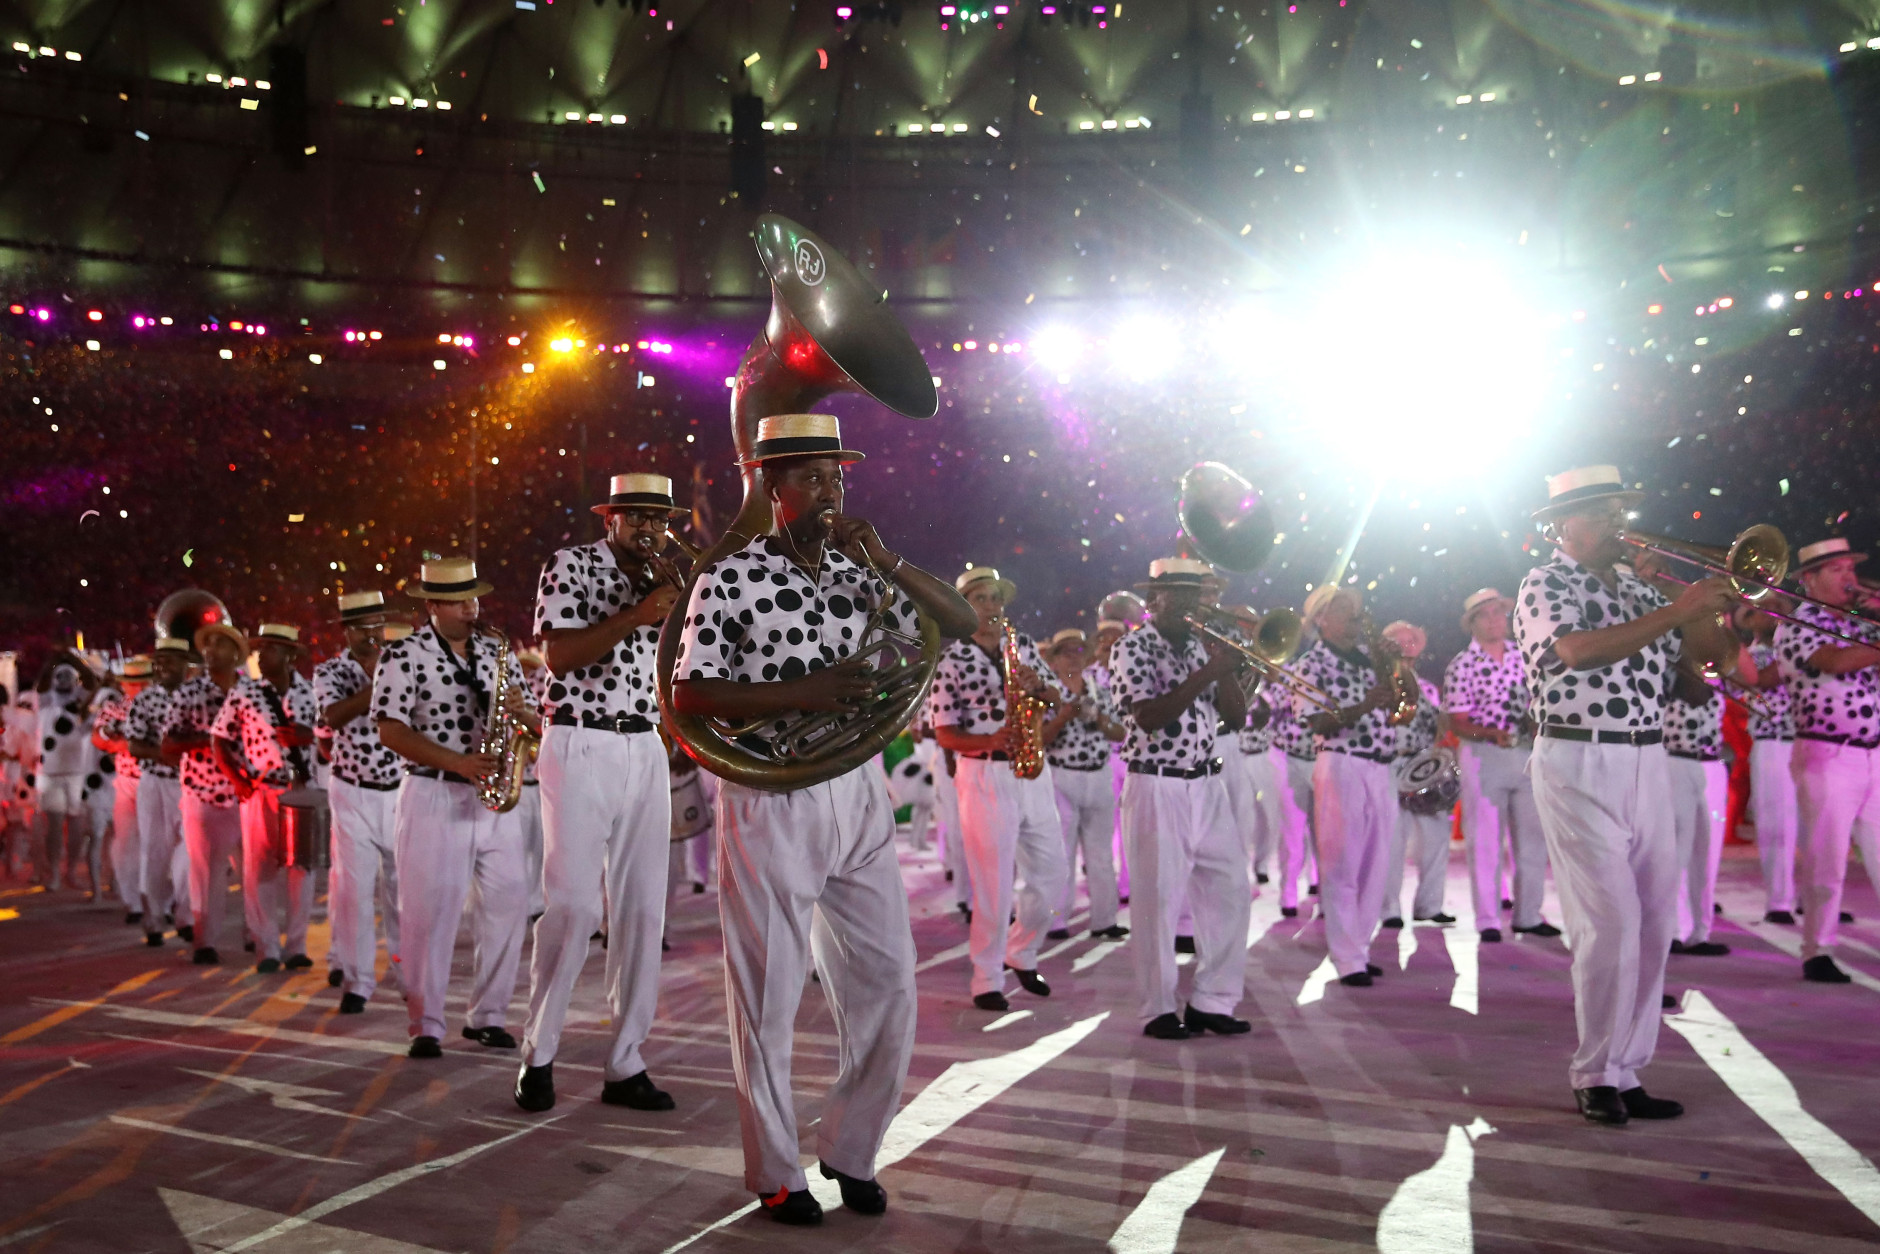 RIO DE JANEIRO, BRAZIL - AUGUST 21:  A marching band entertains the crowd and athletes during the Closing Ceremony on Day 16 of the Rio 2016 Olympic Games at Maracana Stadium on August 21, 2016 in Rio de Janeiro, Brazil.  (Photo by Cameron Spencer/Getty Images)